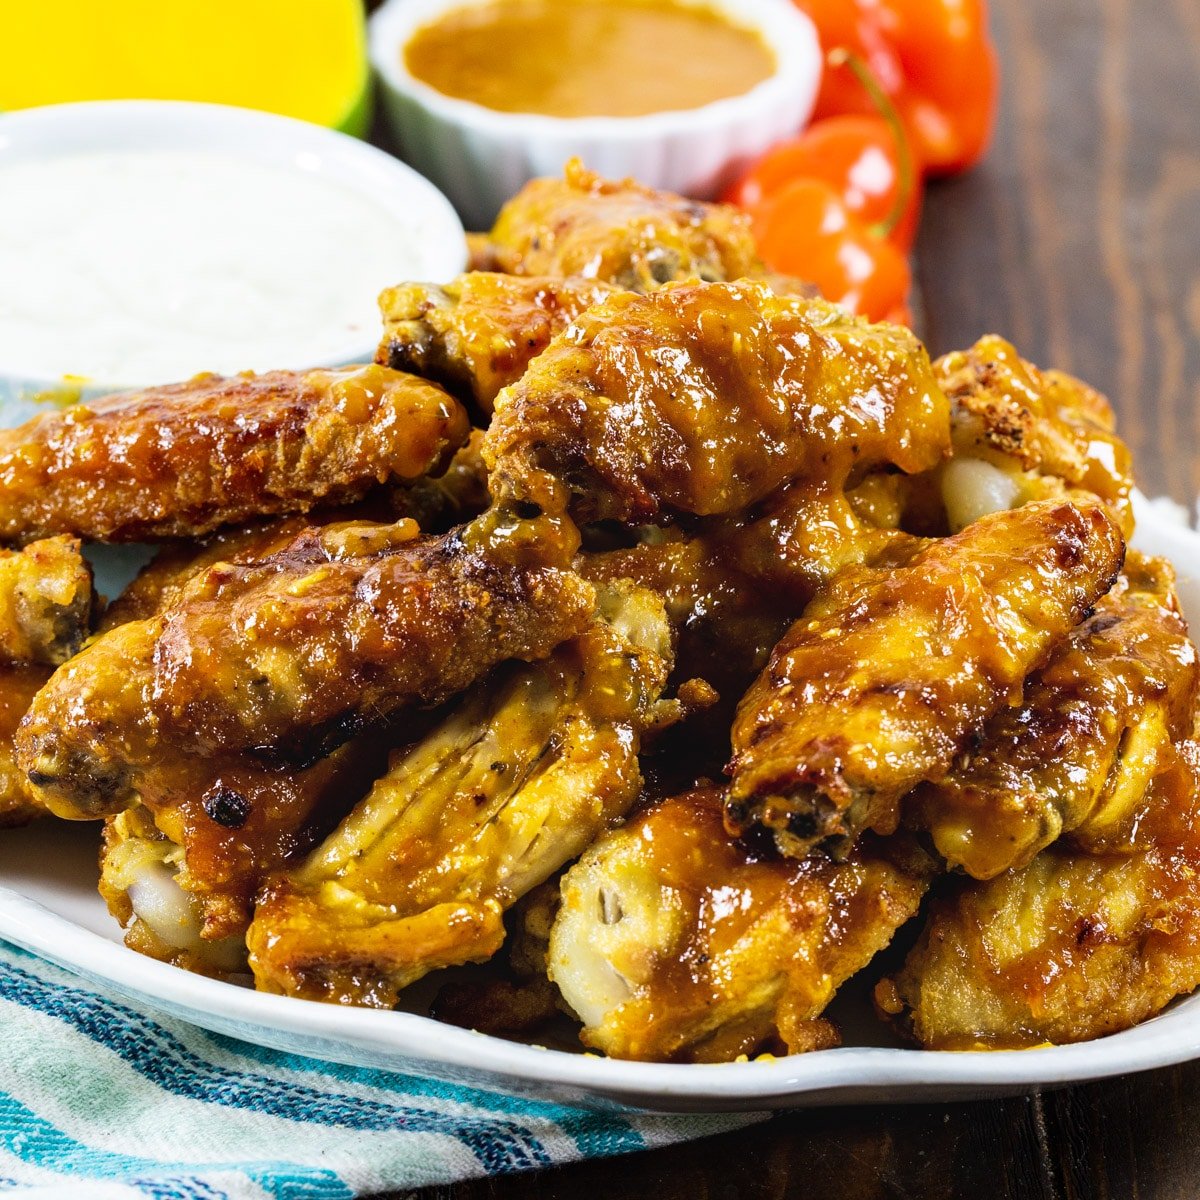 Mango Habanero Chicken Wings on a plate with a bowl of dressing.